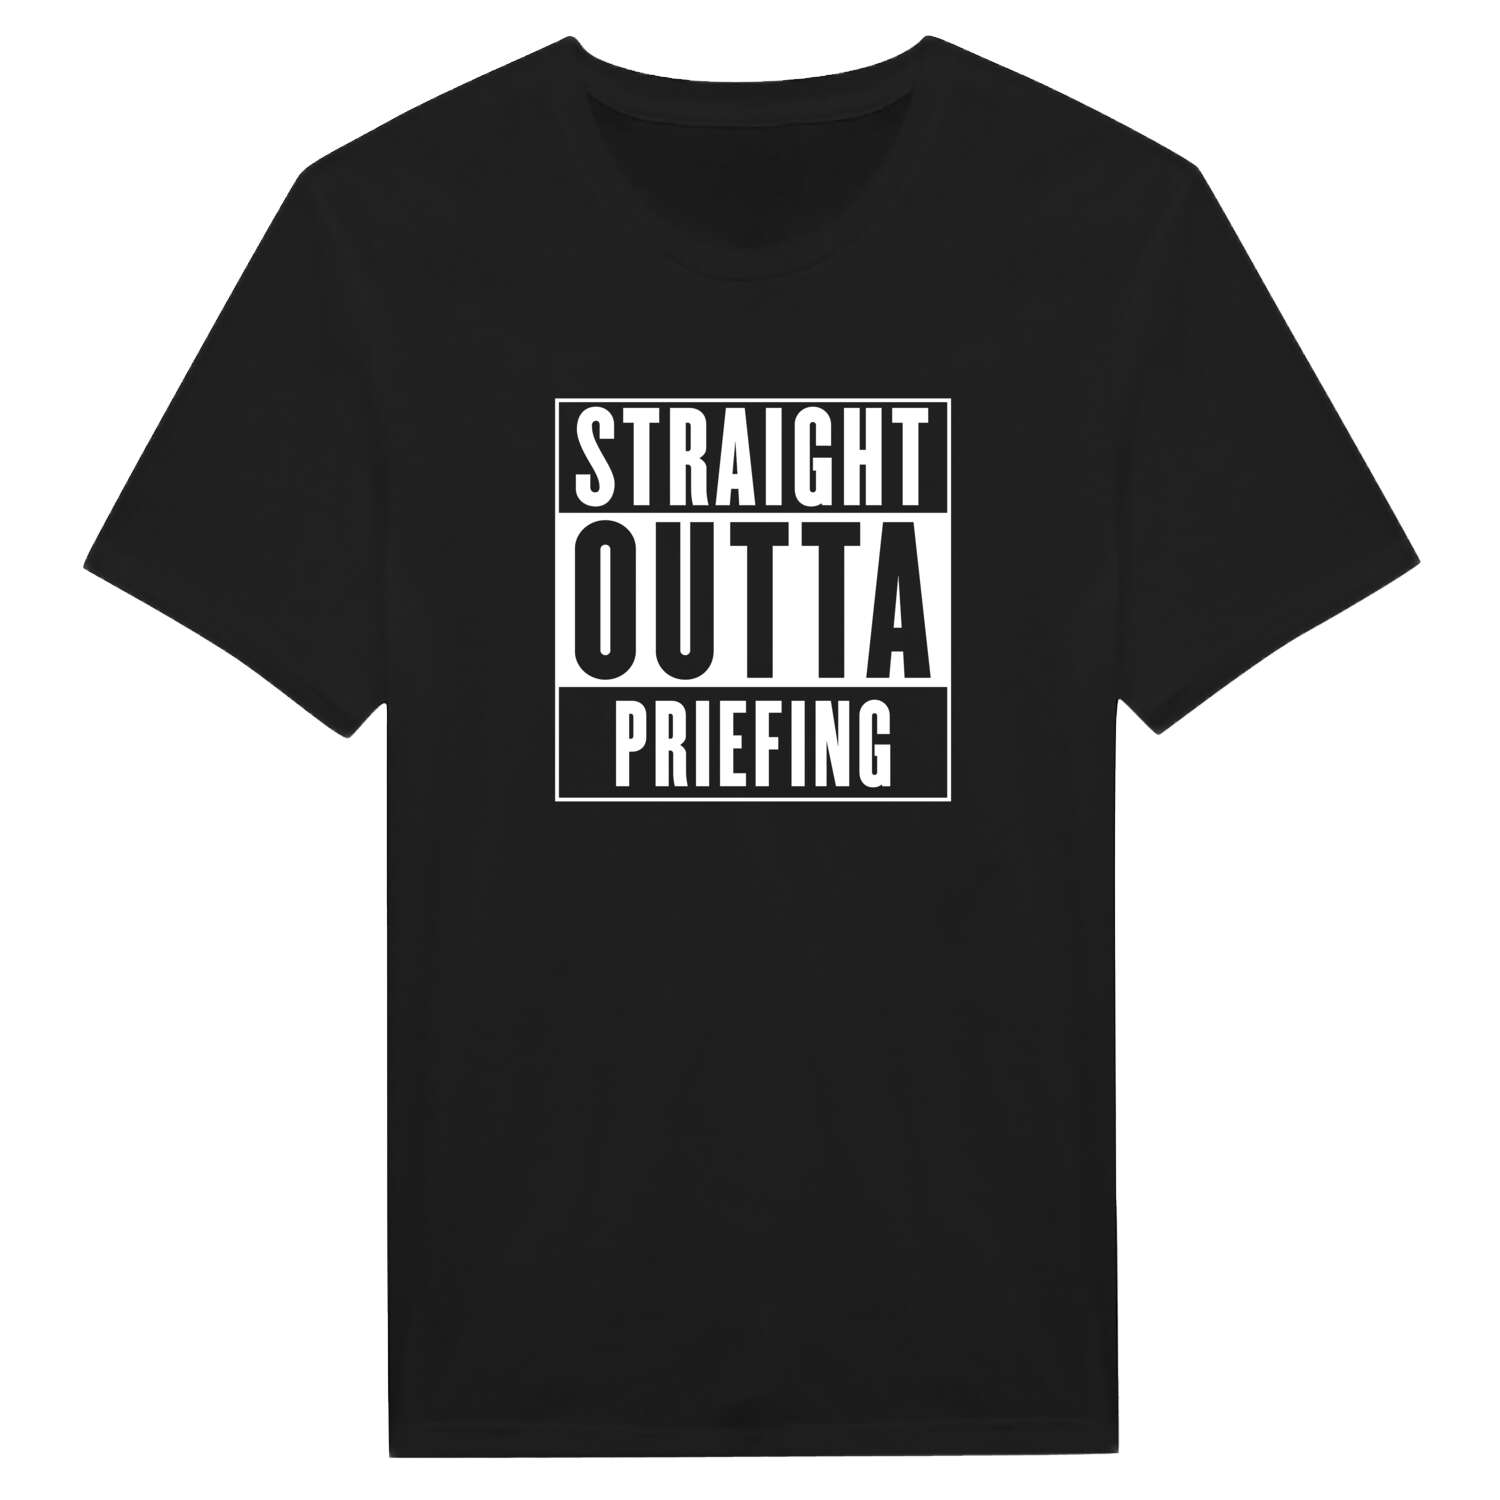 Priefing T-Shirt »Straight Outta«